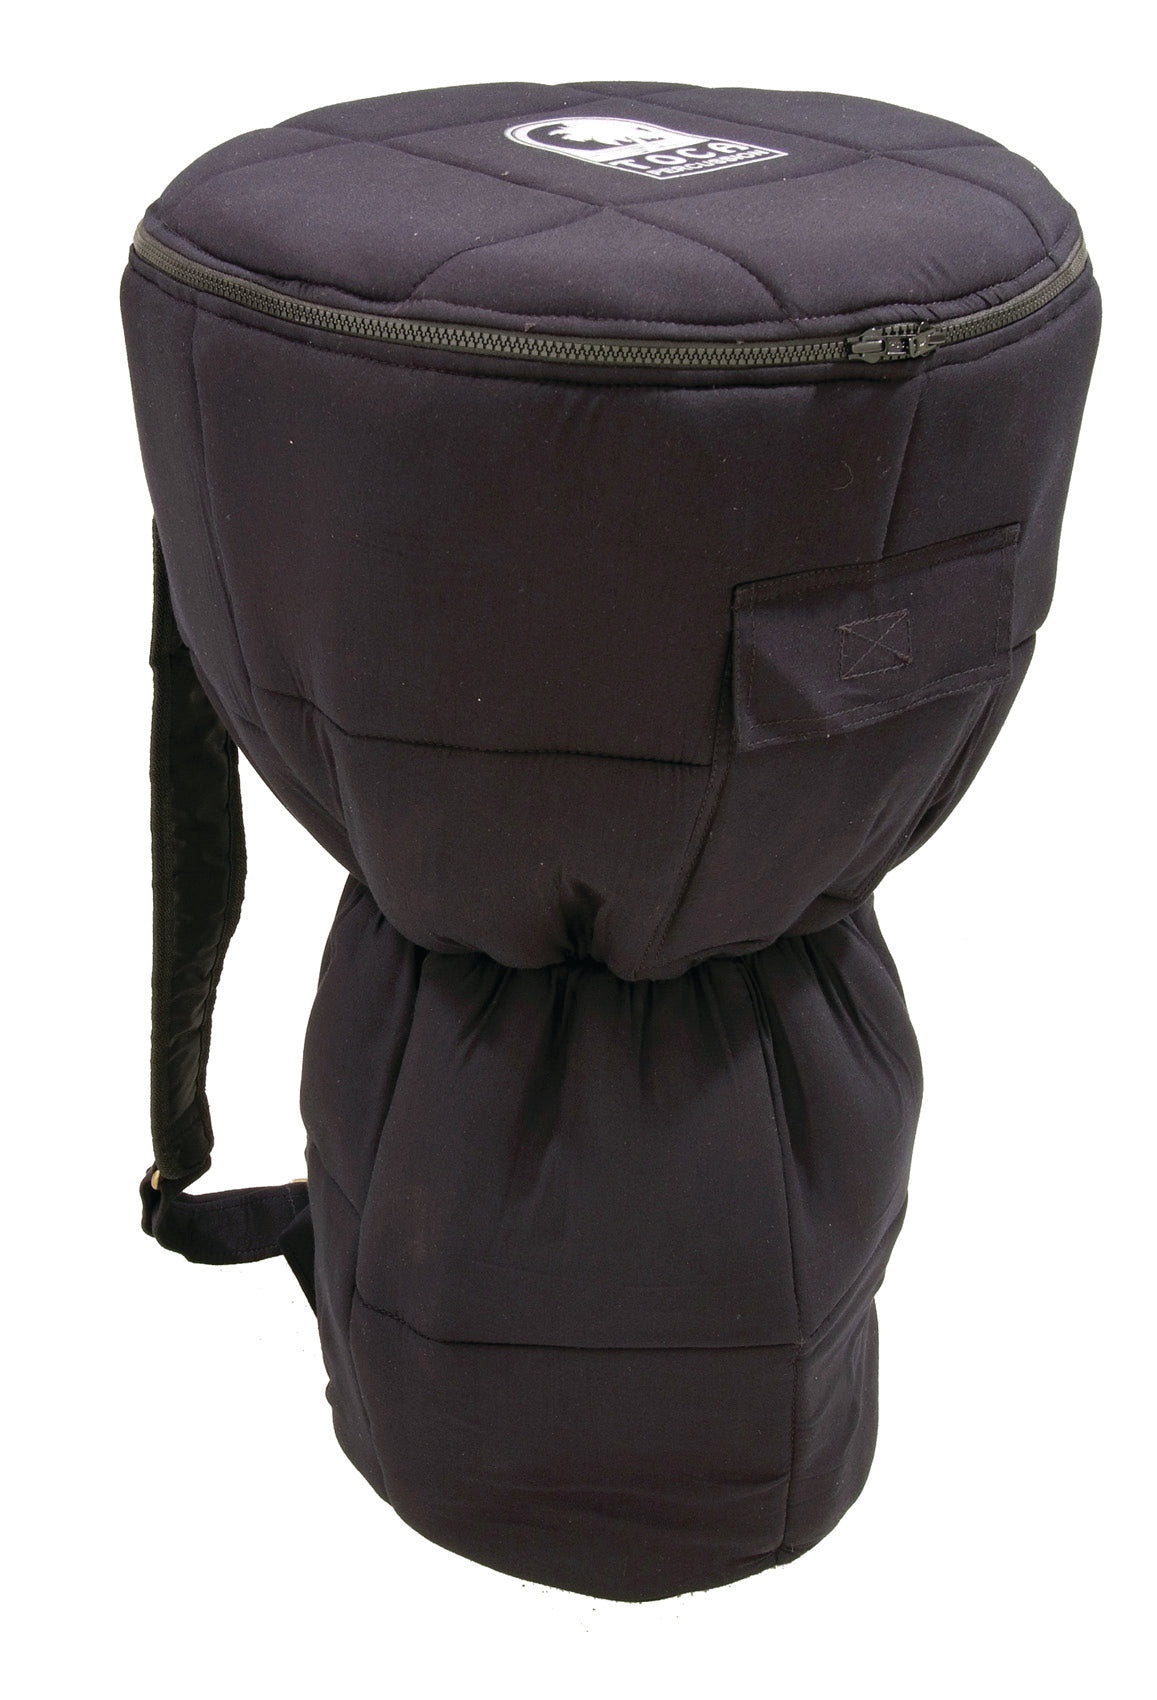 Toca 10" Djembe Bag with Carry All Strap Kit